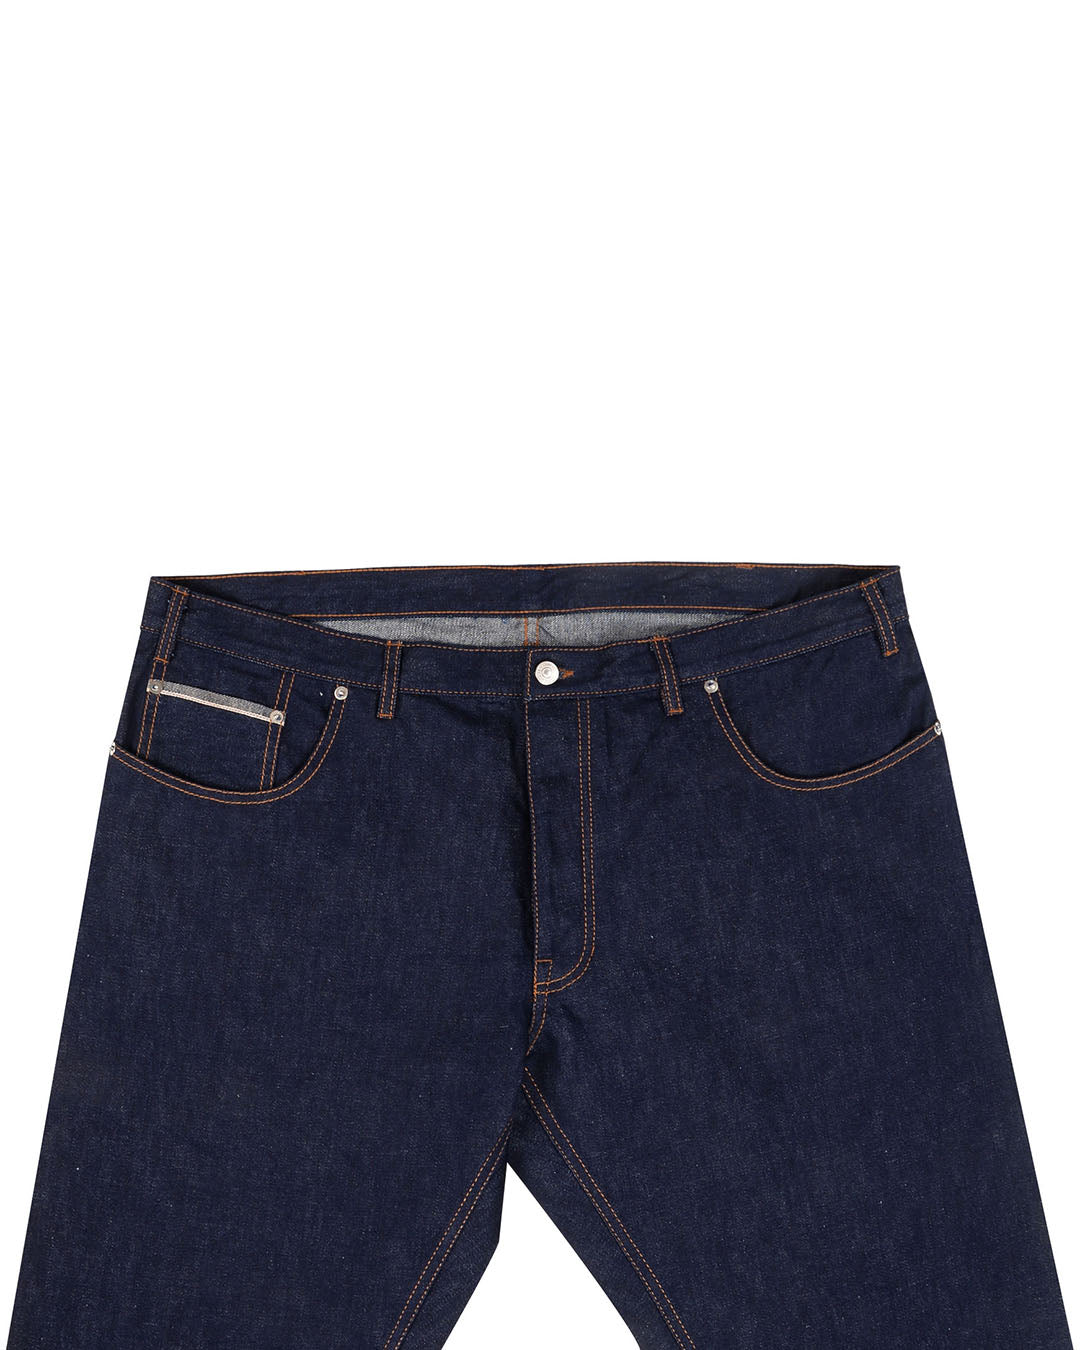 Front view of custom linen cotton jeans for men by Luxire in indigo